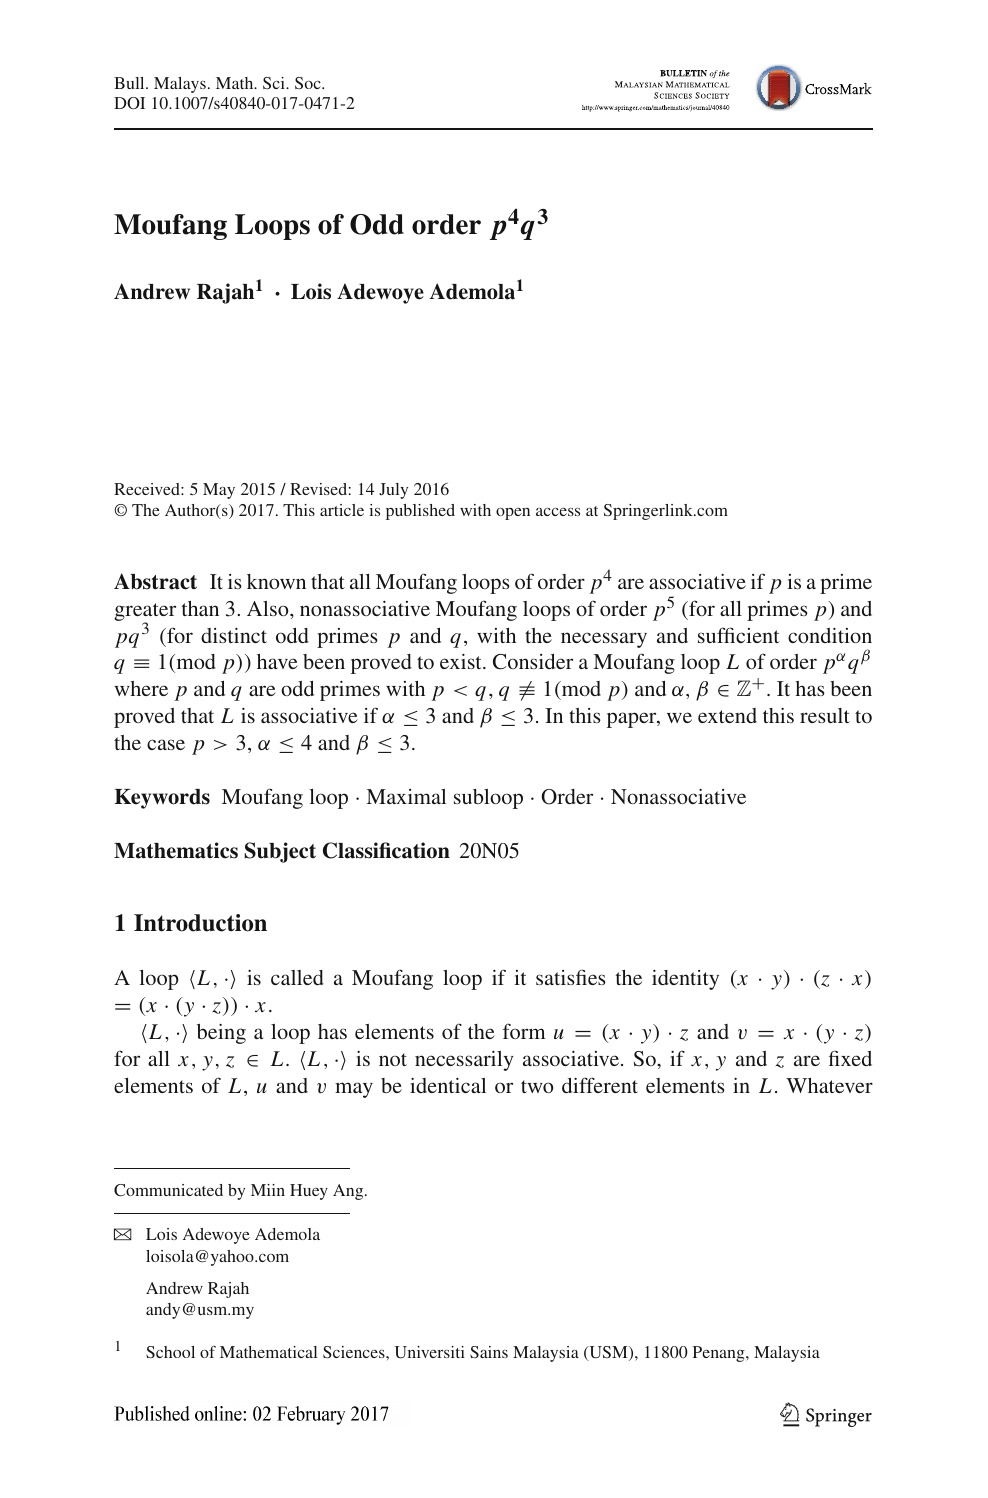 Moufang Loops Of Odd Order P 4q 3 P 4 Q 3 Topic Of Research Paper In Mathematics Download Scholarly Article Pdf And Read For Free On Cyberleninka Open Science Hub